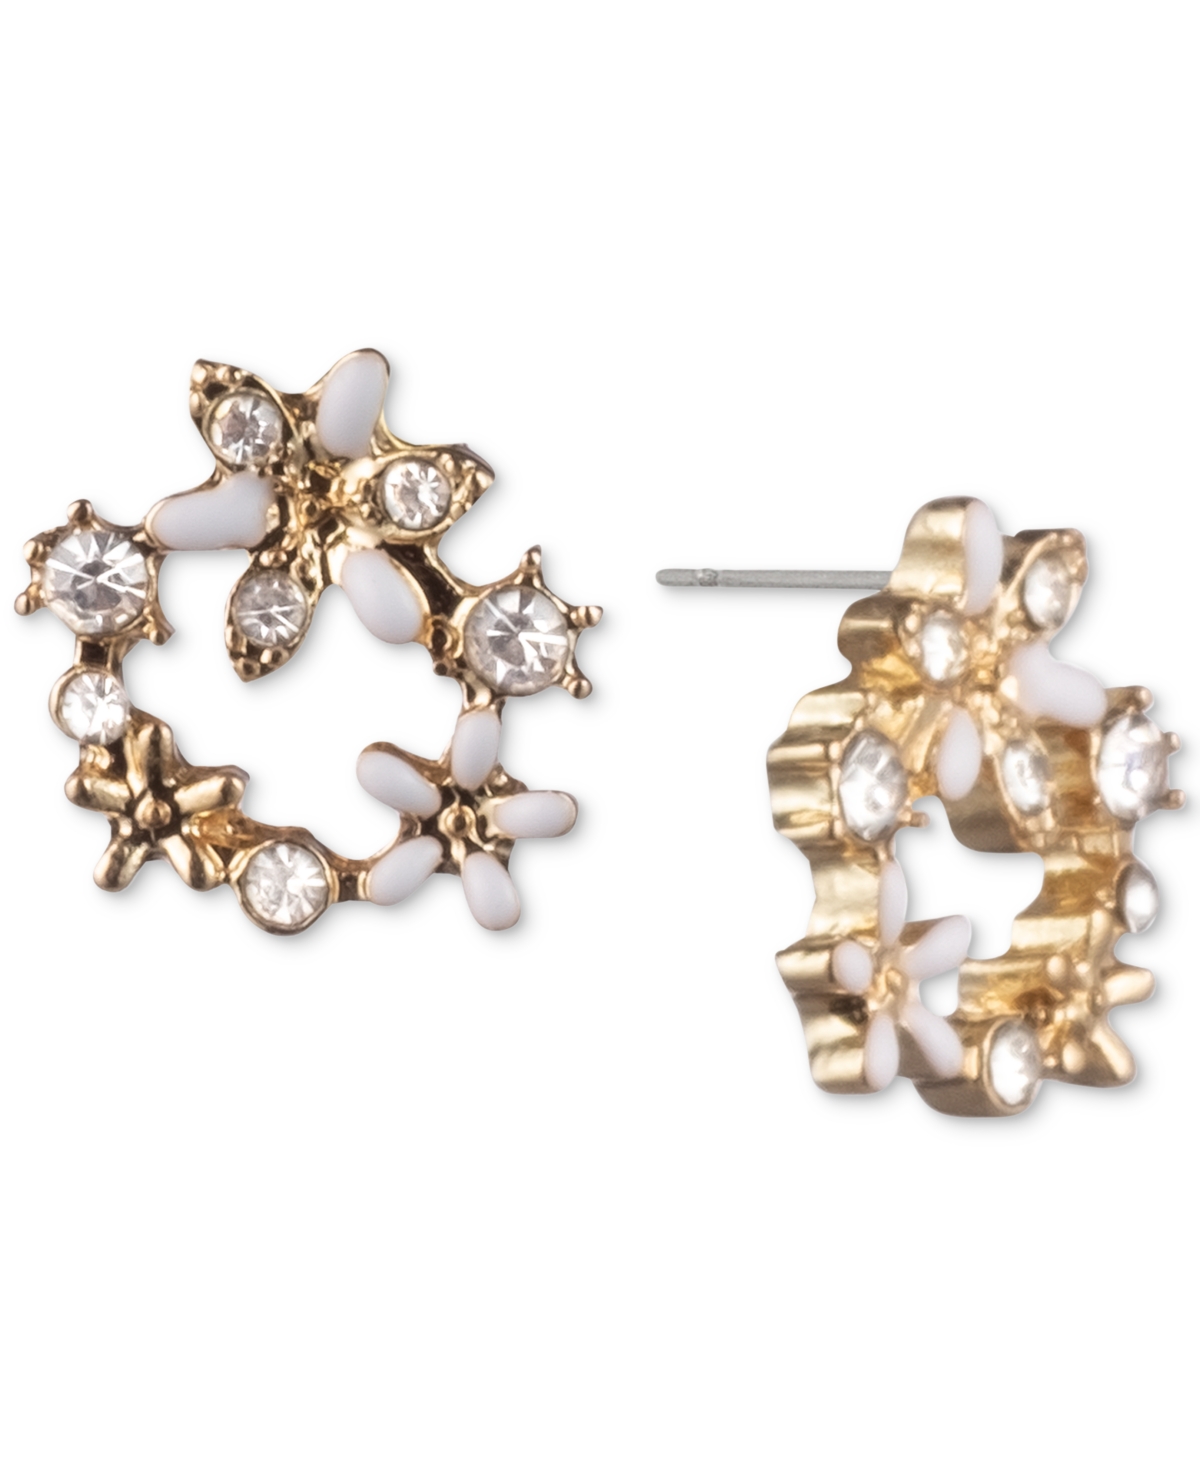 Crystal Flower Open Stud Extra Small Earrings - White